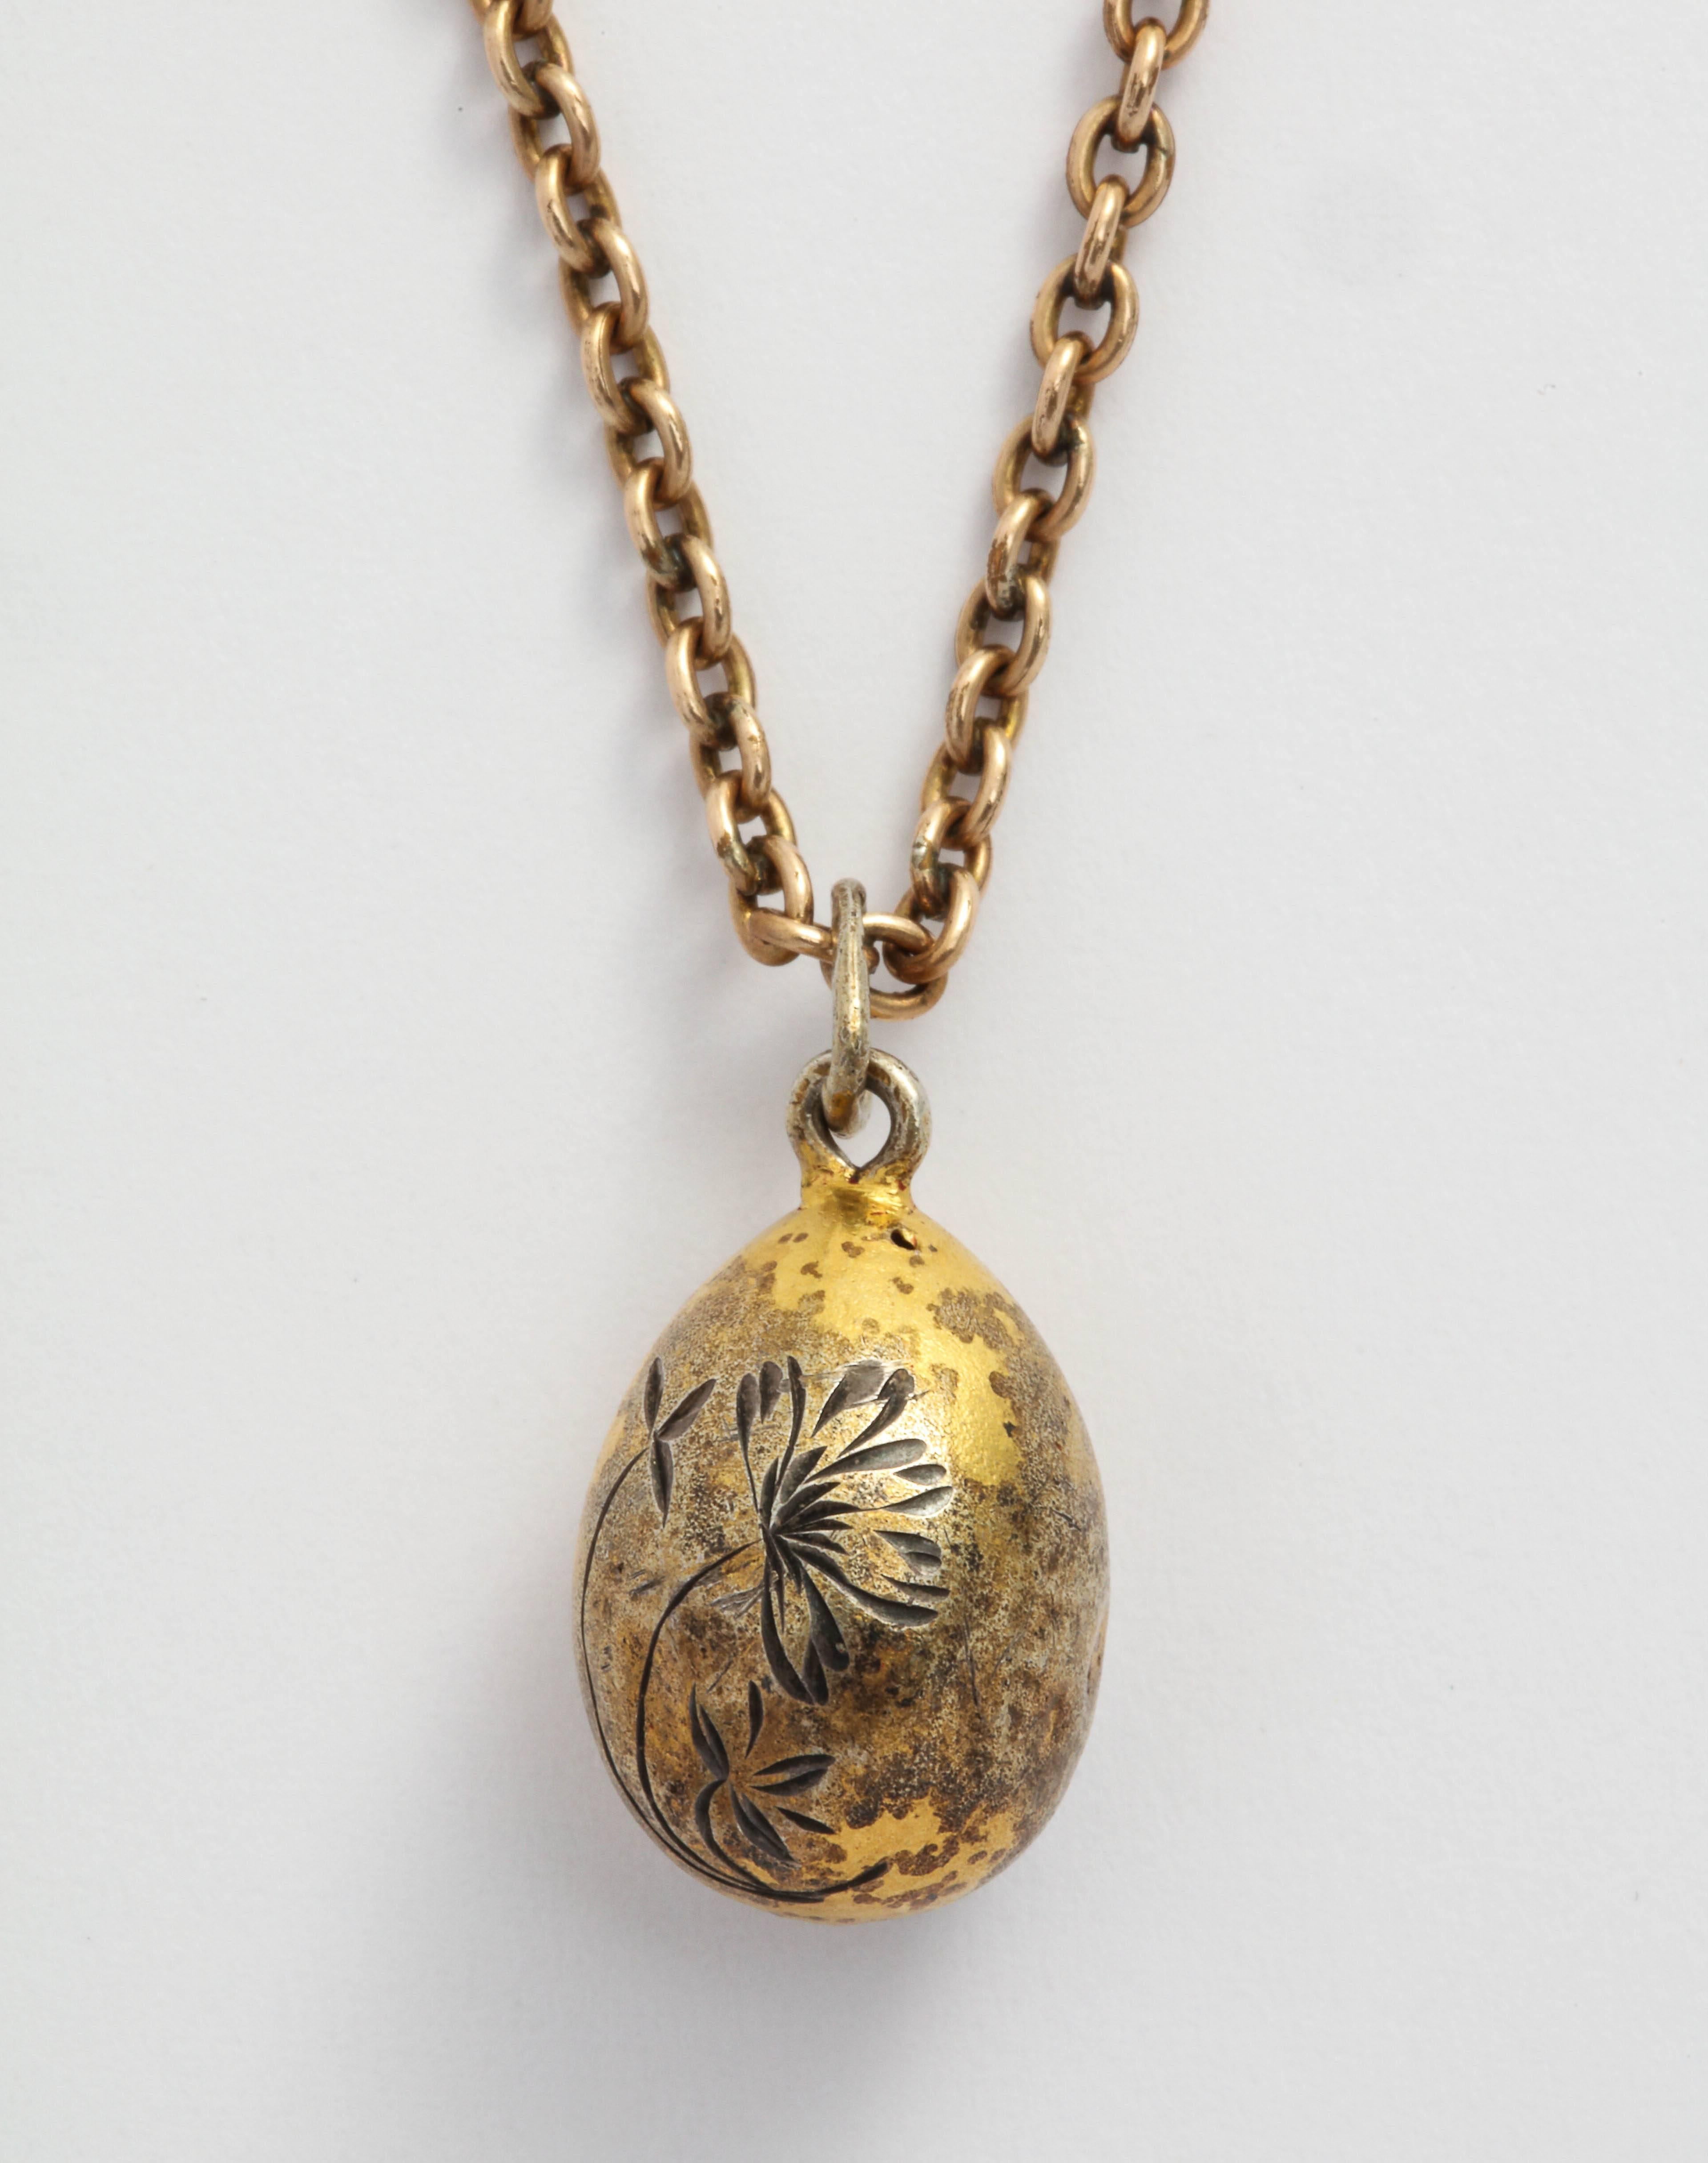 A Romanov era treasure from the period of Tsar Nicholas II, this silver gilt Russian miniature egg pendant is etched with flowers on one side and XB, for the Russian Easter proclamation Xristos Boskrese on the other, with a silver suspension